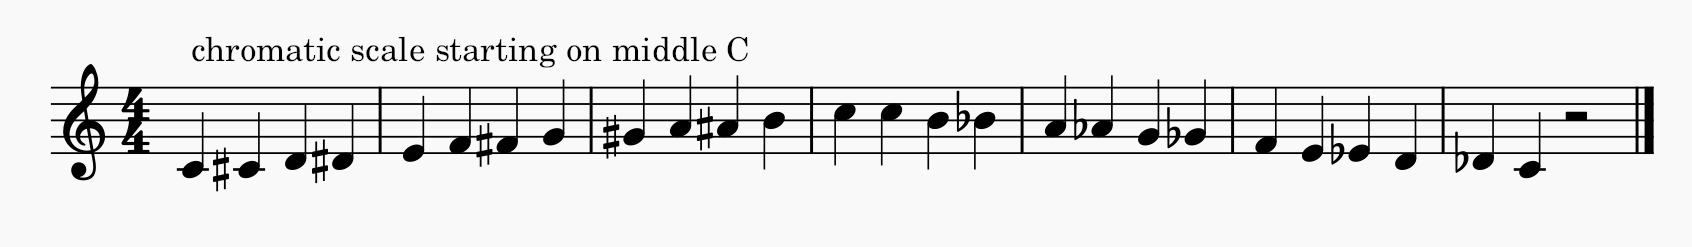 Chromatic scale starting on C